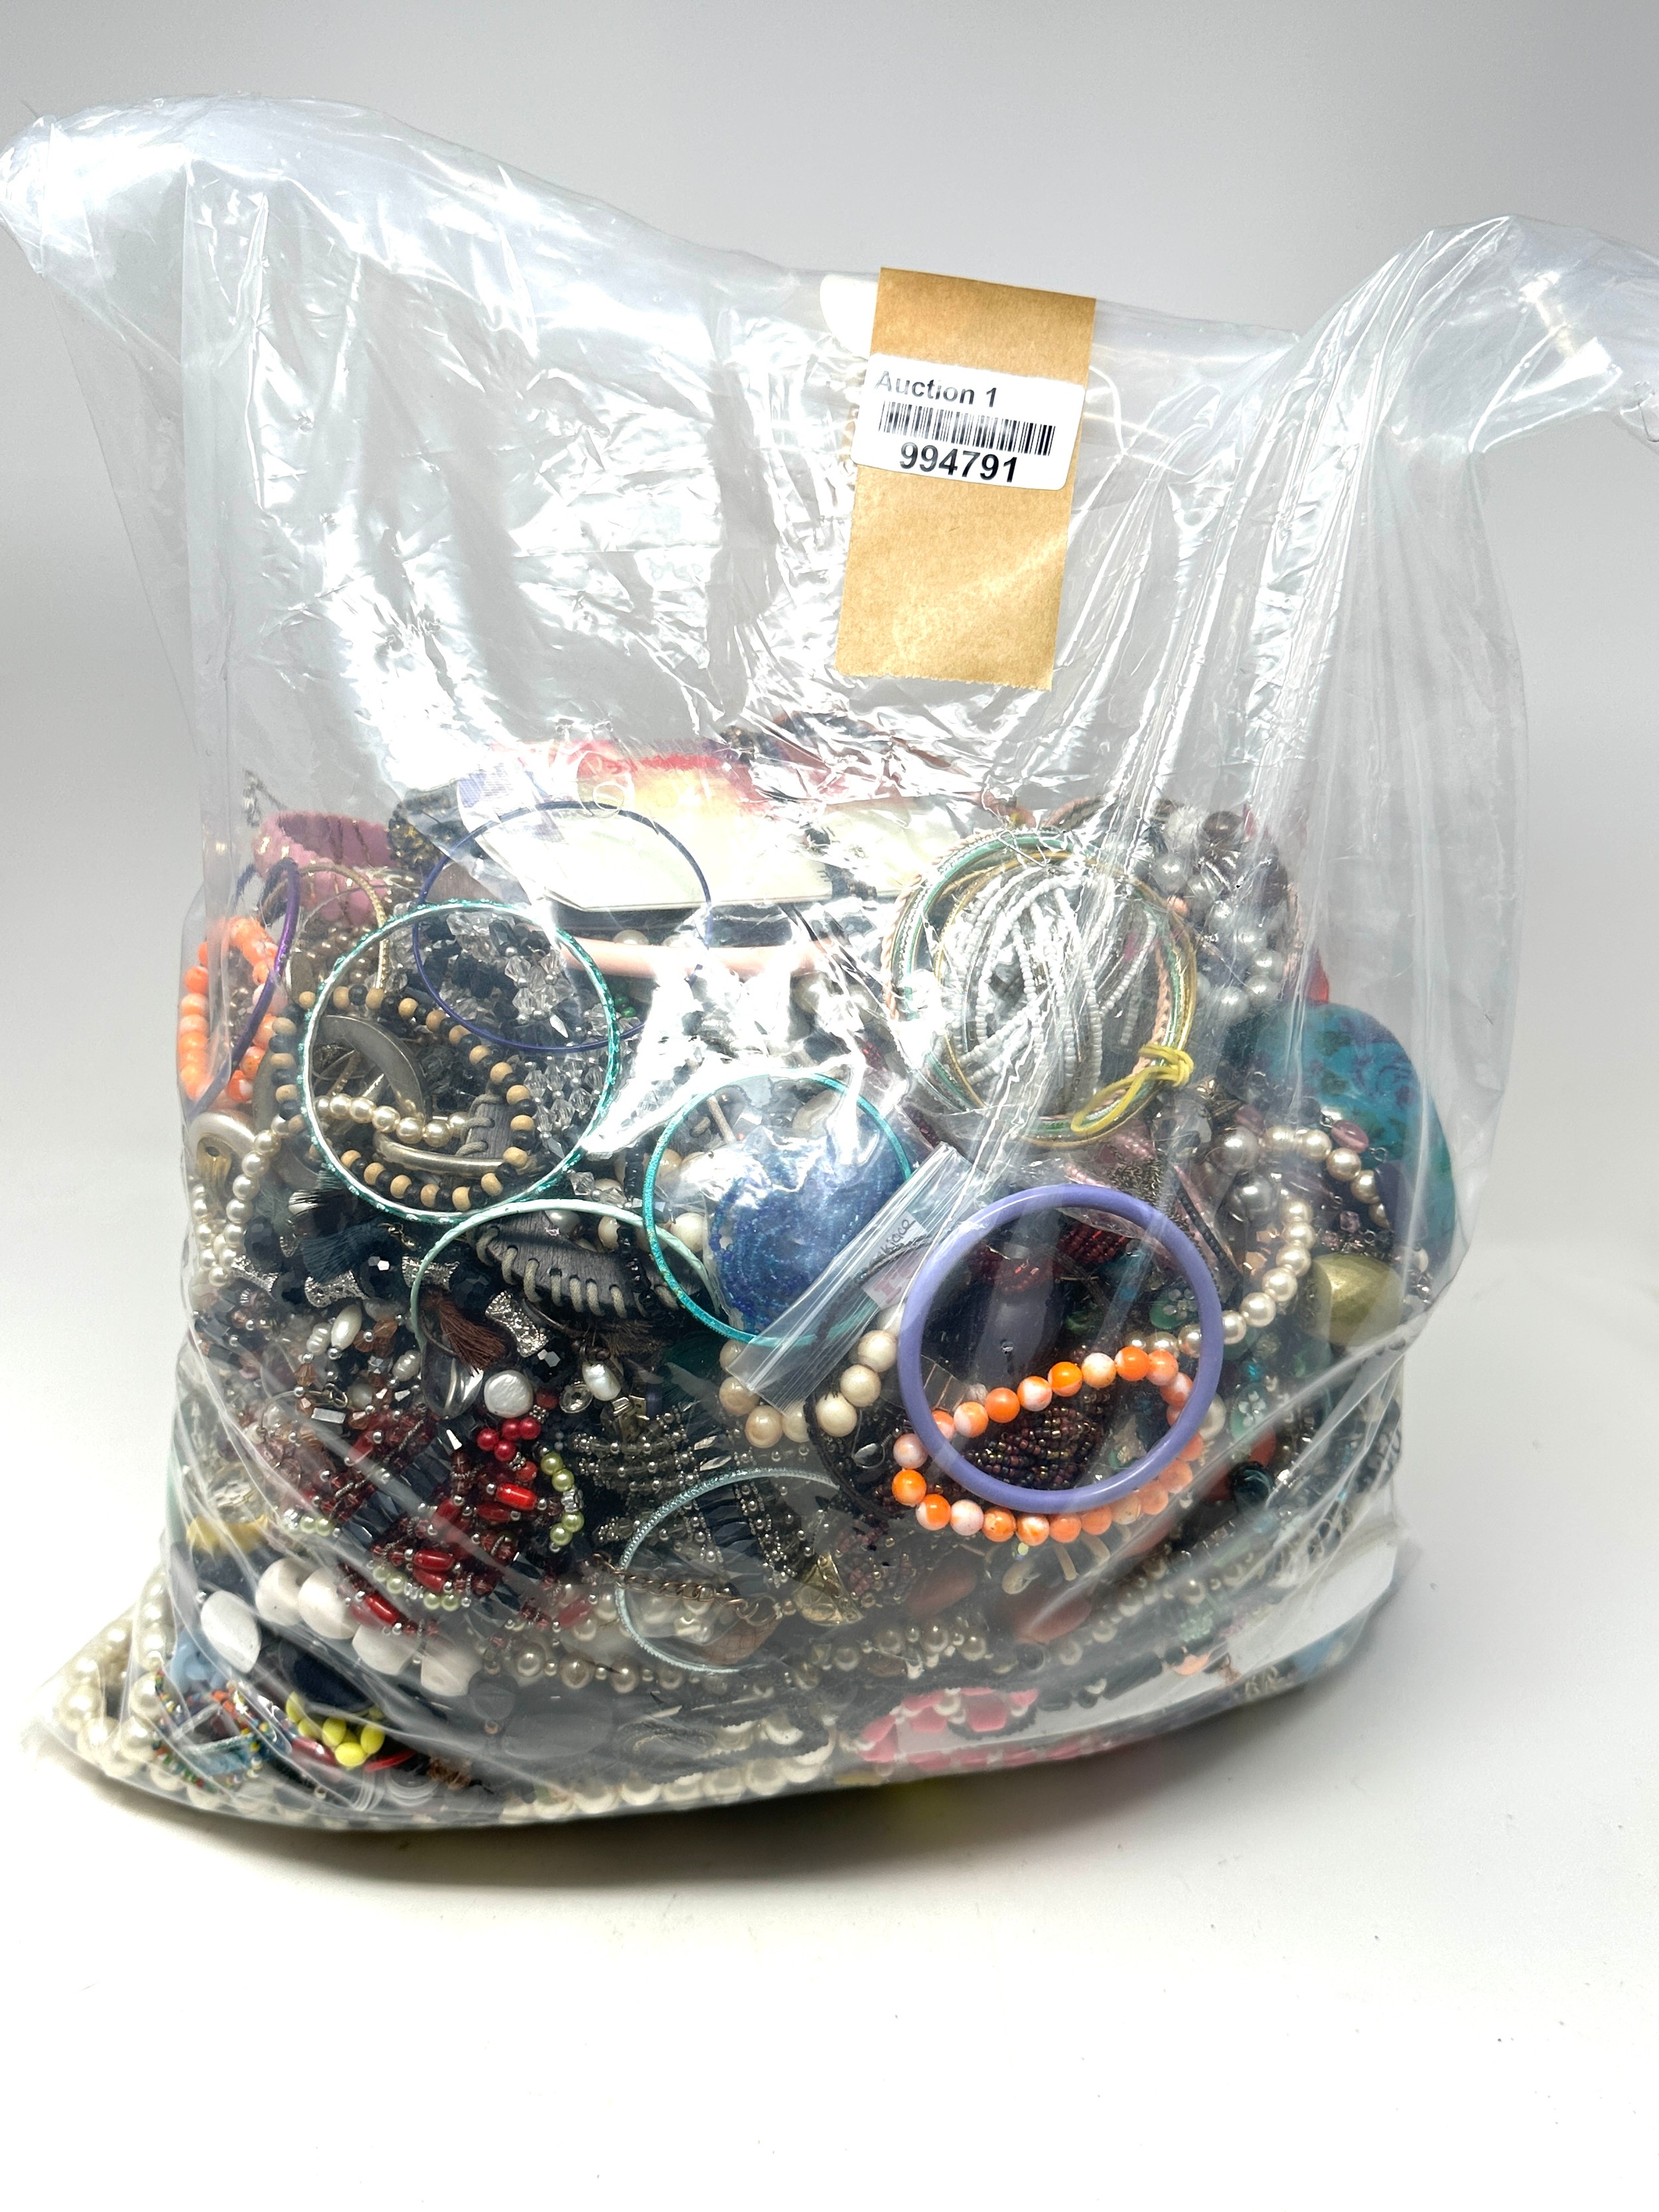 10kg UNSORTED COSTUME JEWELLERY inc. Bangles, Necklaces, Rings, Earrings.parts spares